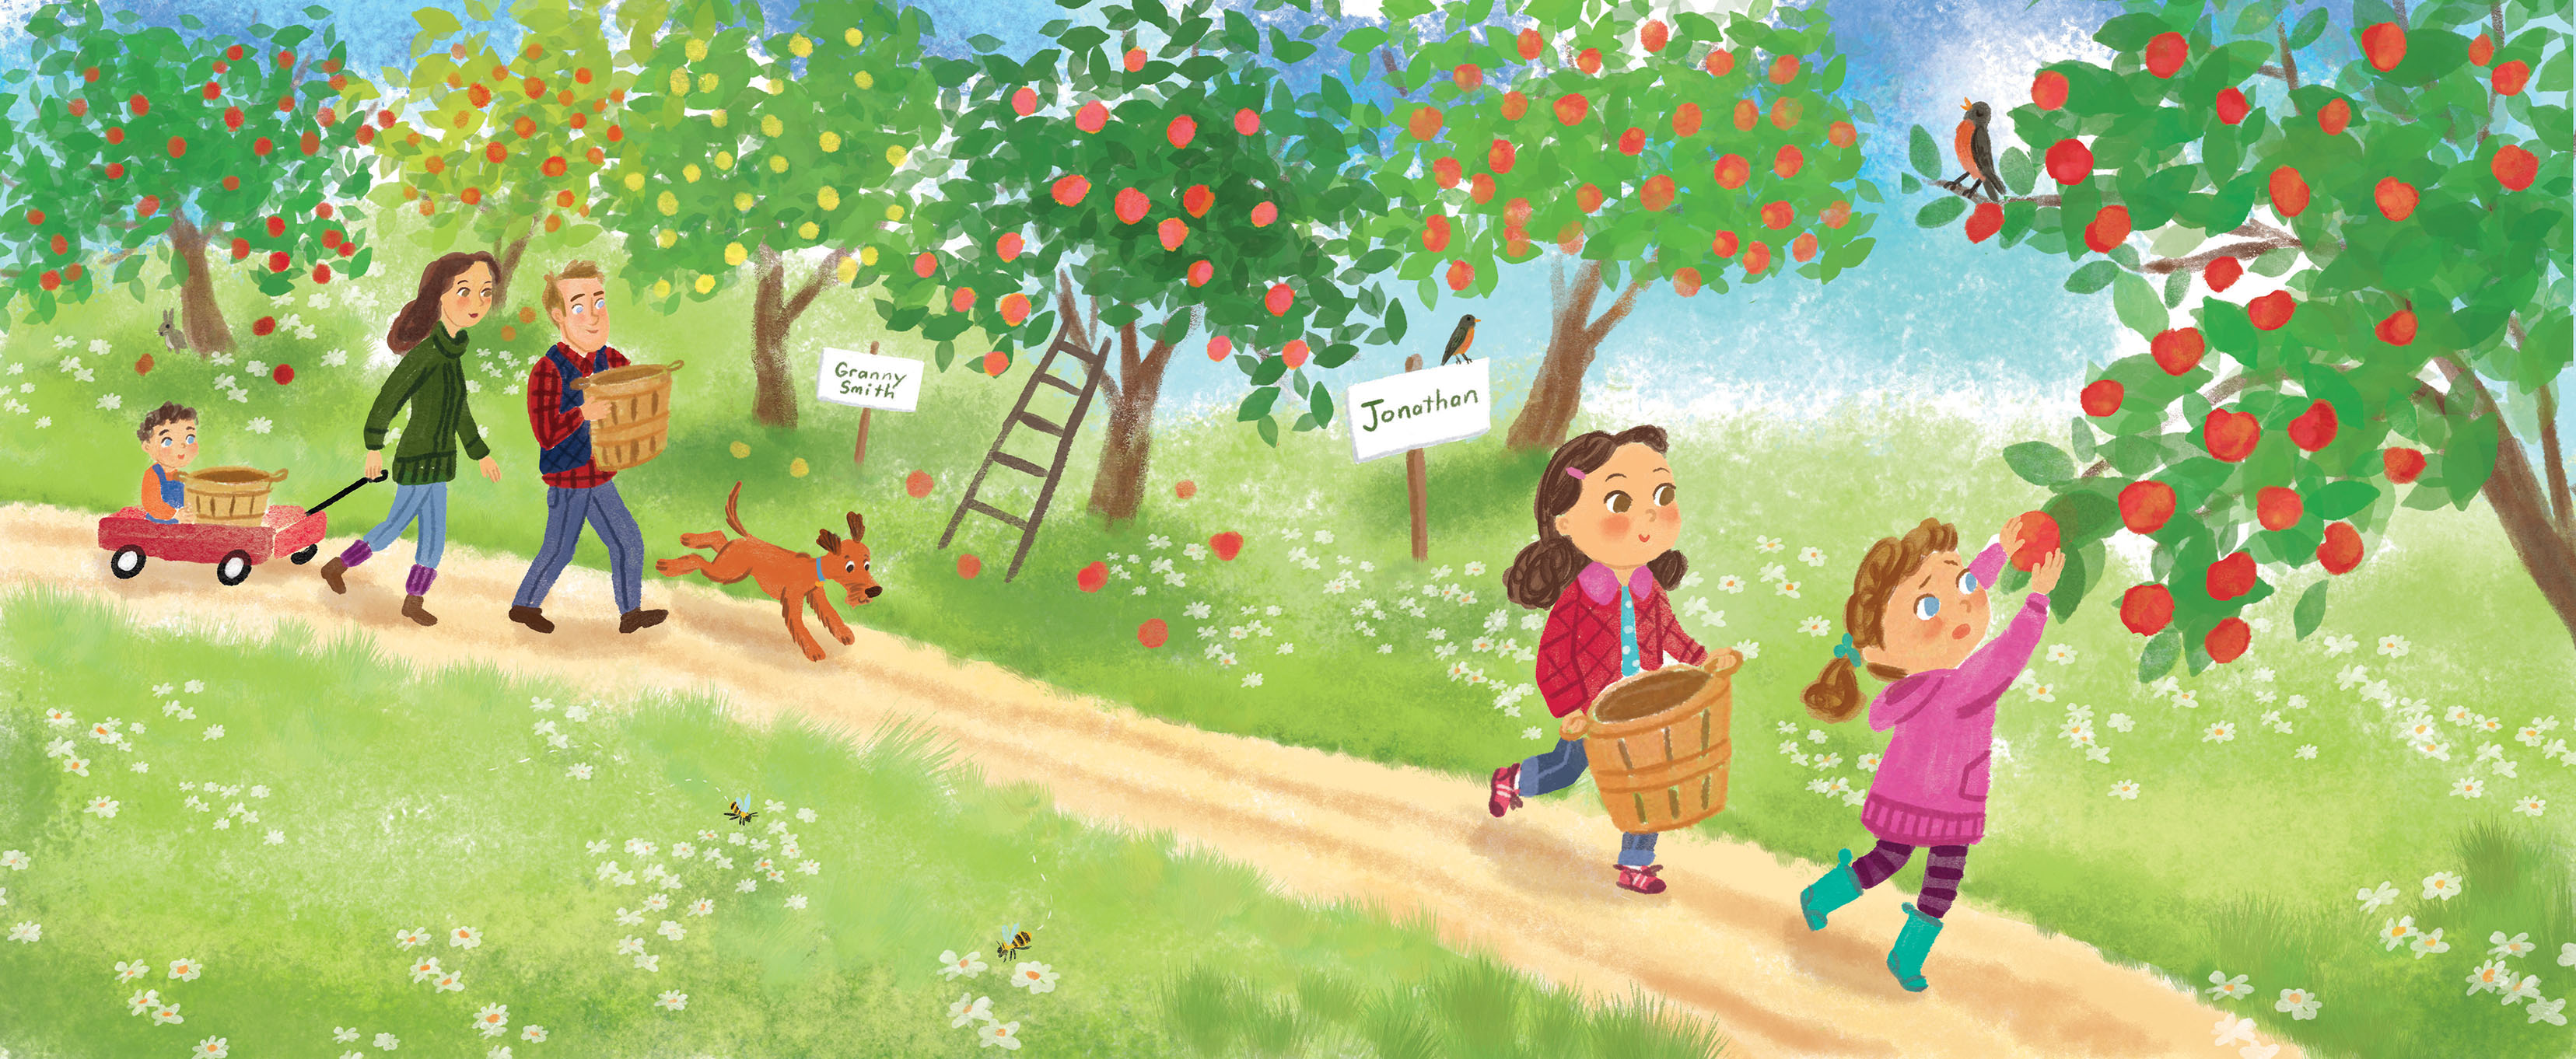 Illustration by Talitha Shipman of a family at an apple orchard. Illustration is called "Applesauce Day"